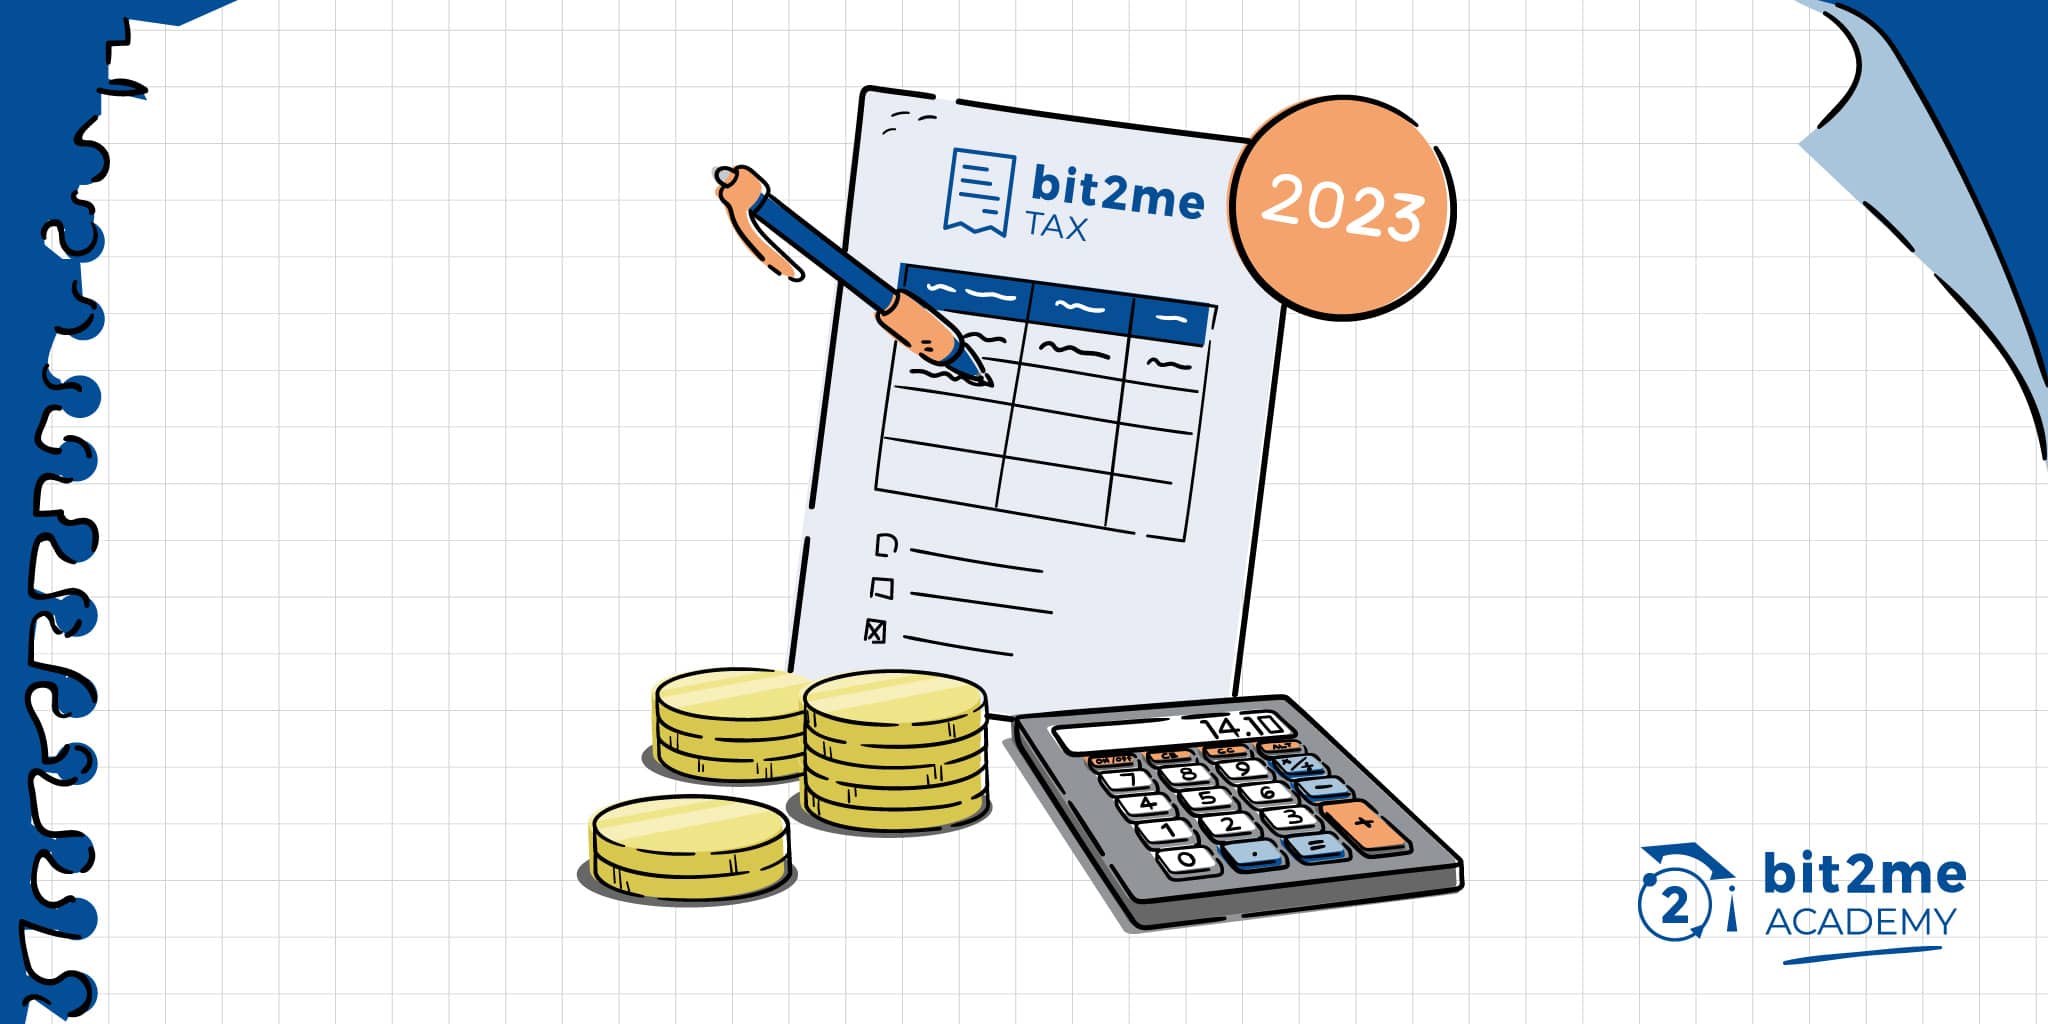 File the Income Tax Return with cryptocurrencies and Bit2Me Tax